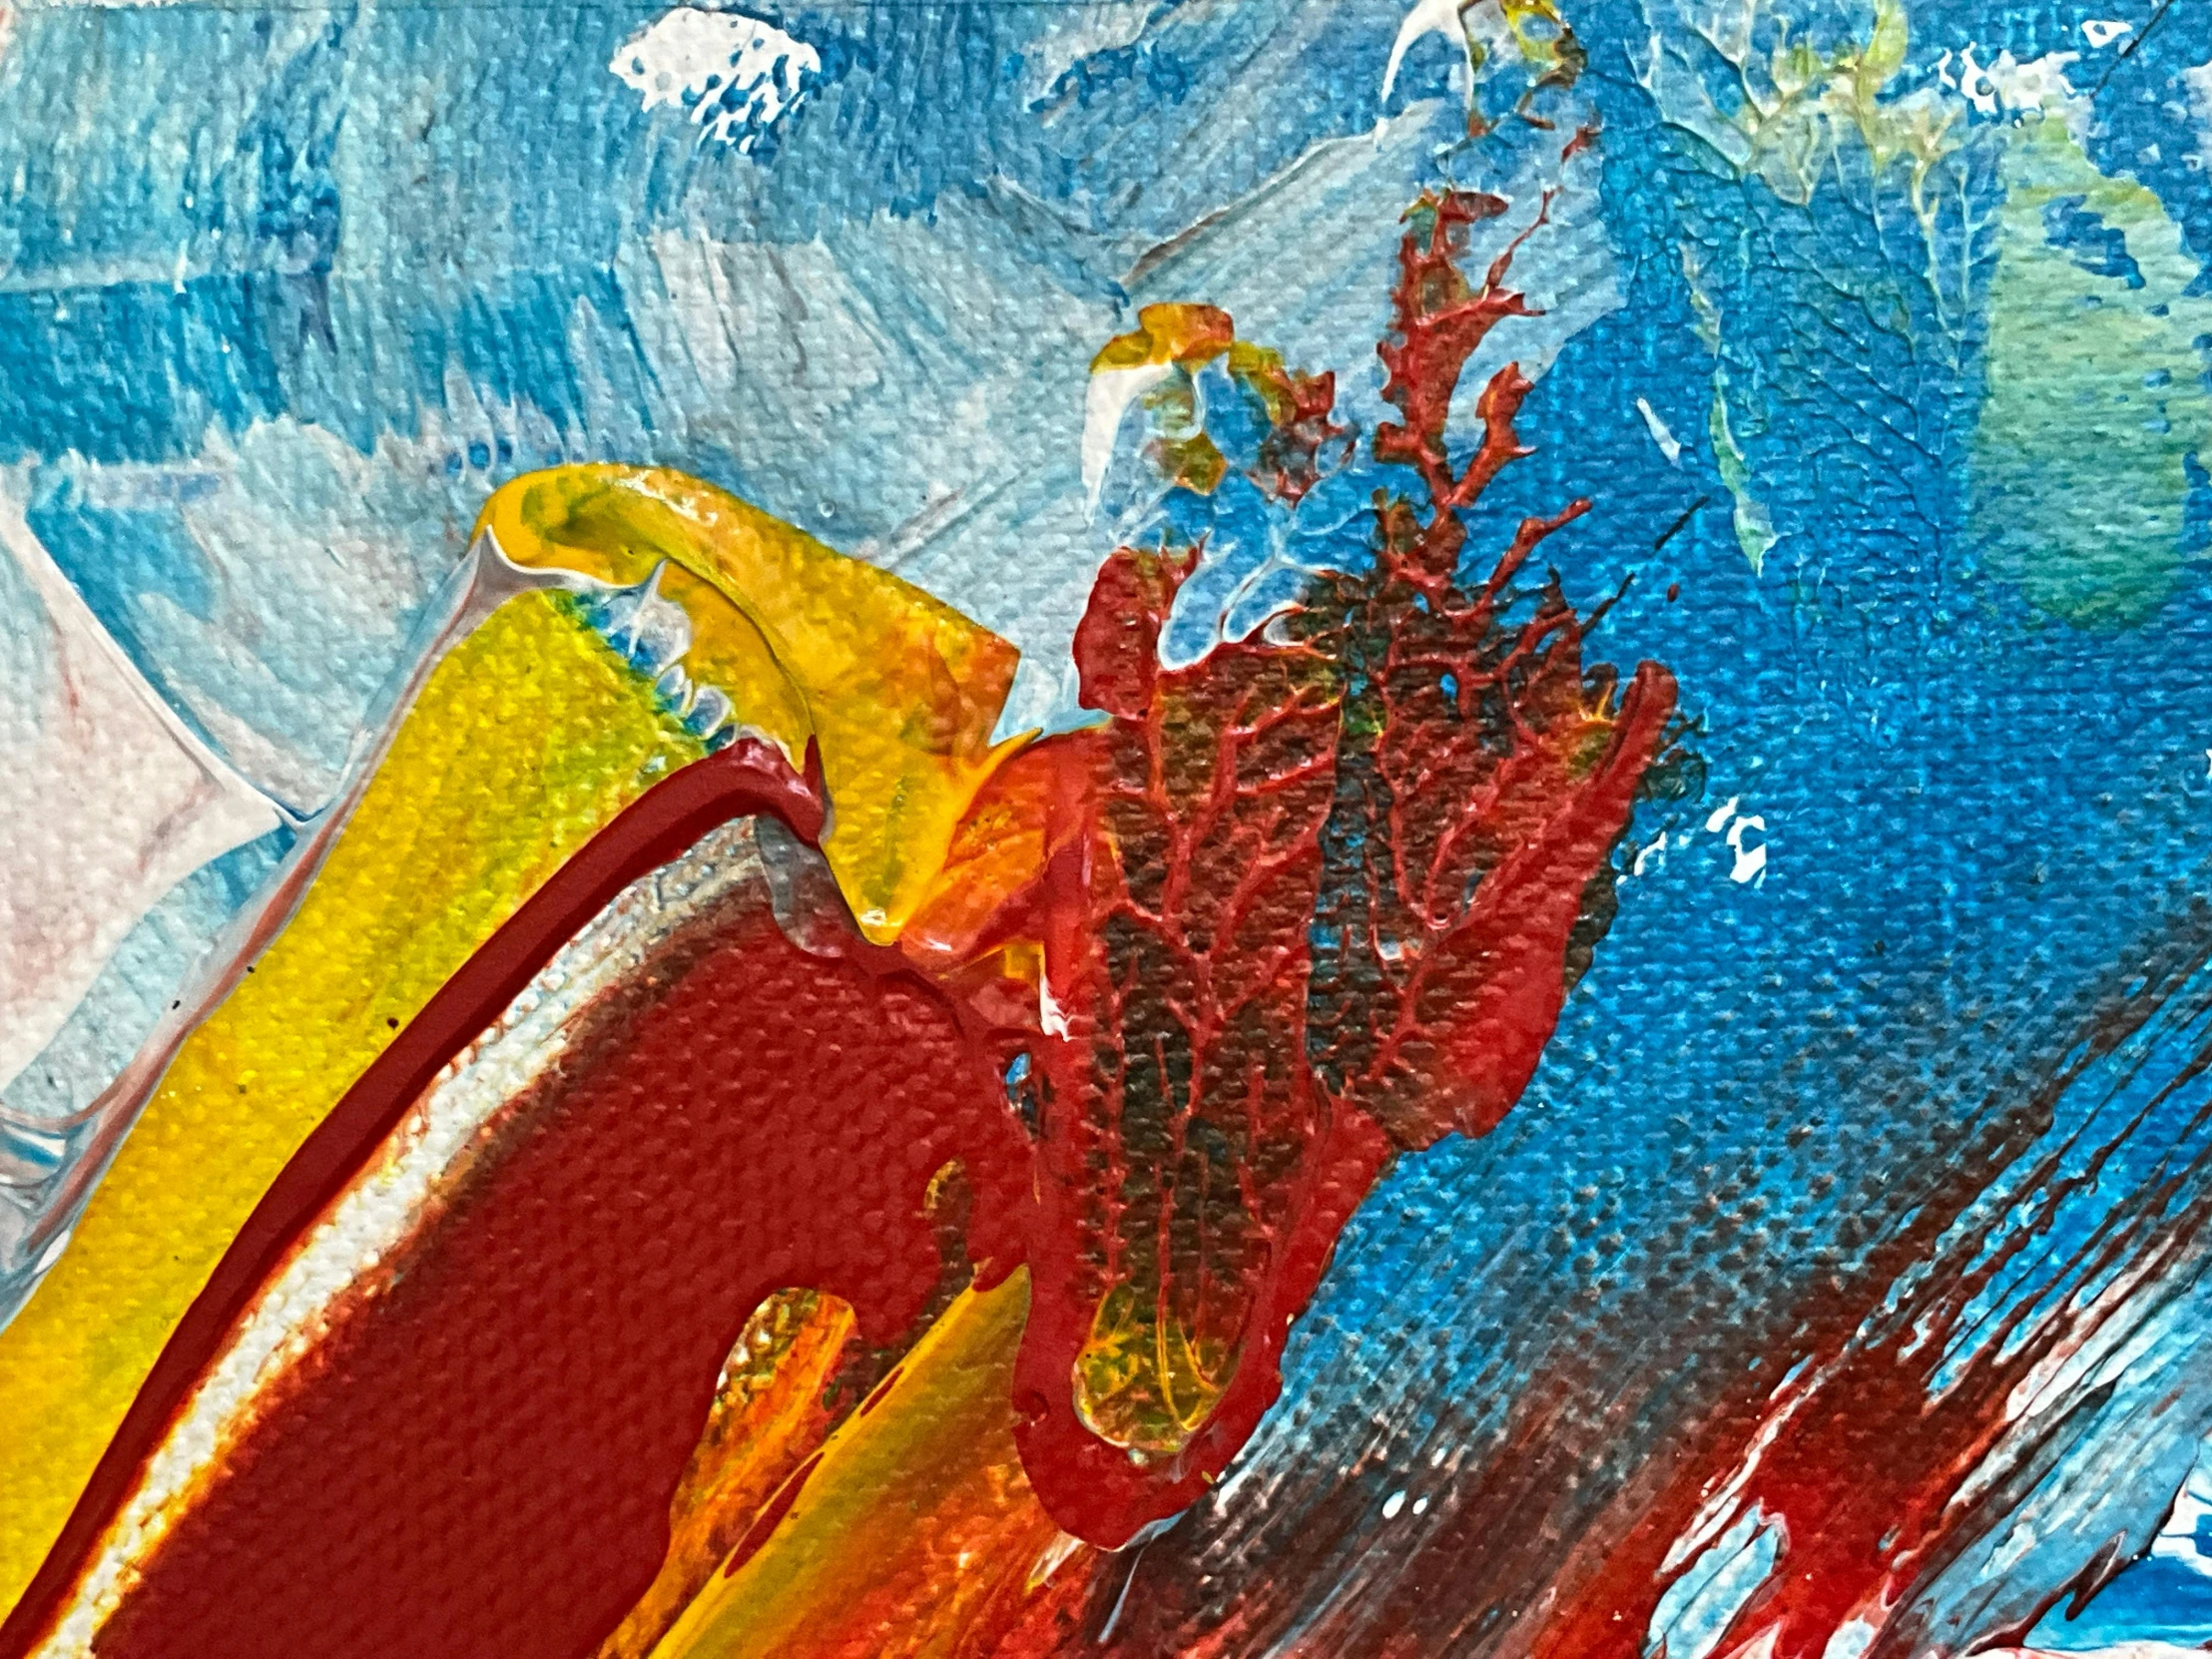 the abstract expression in painting shows a red and yellow vase